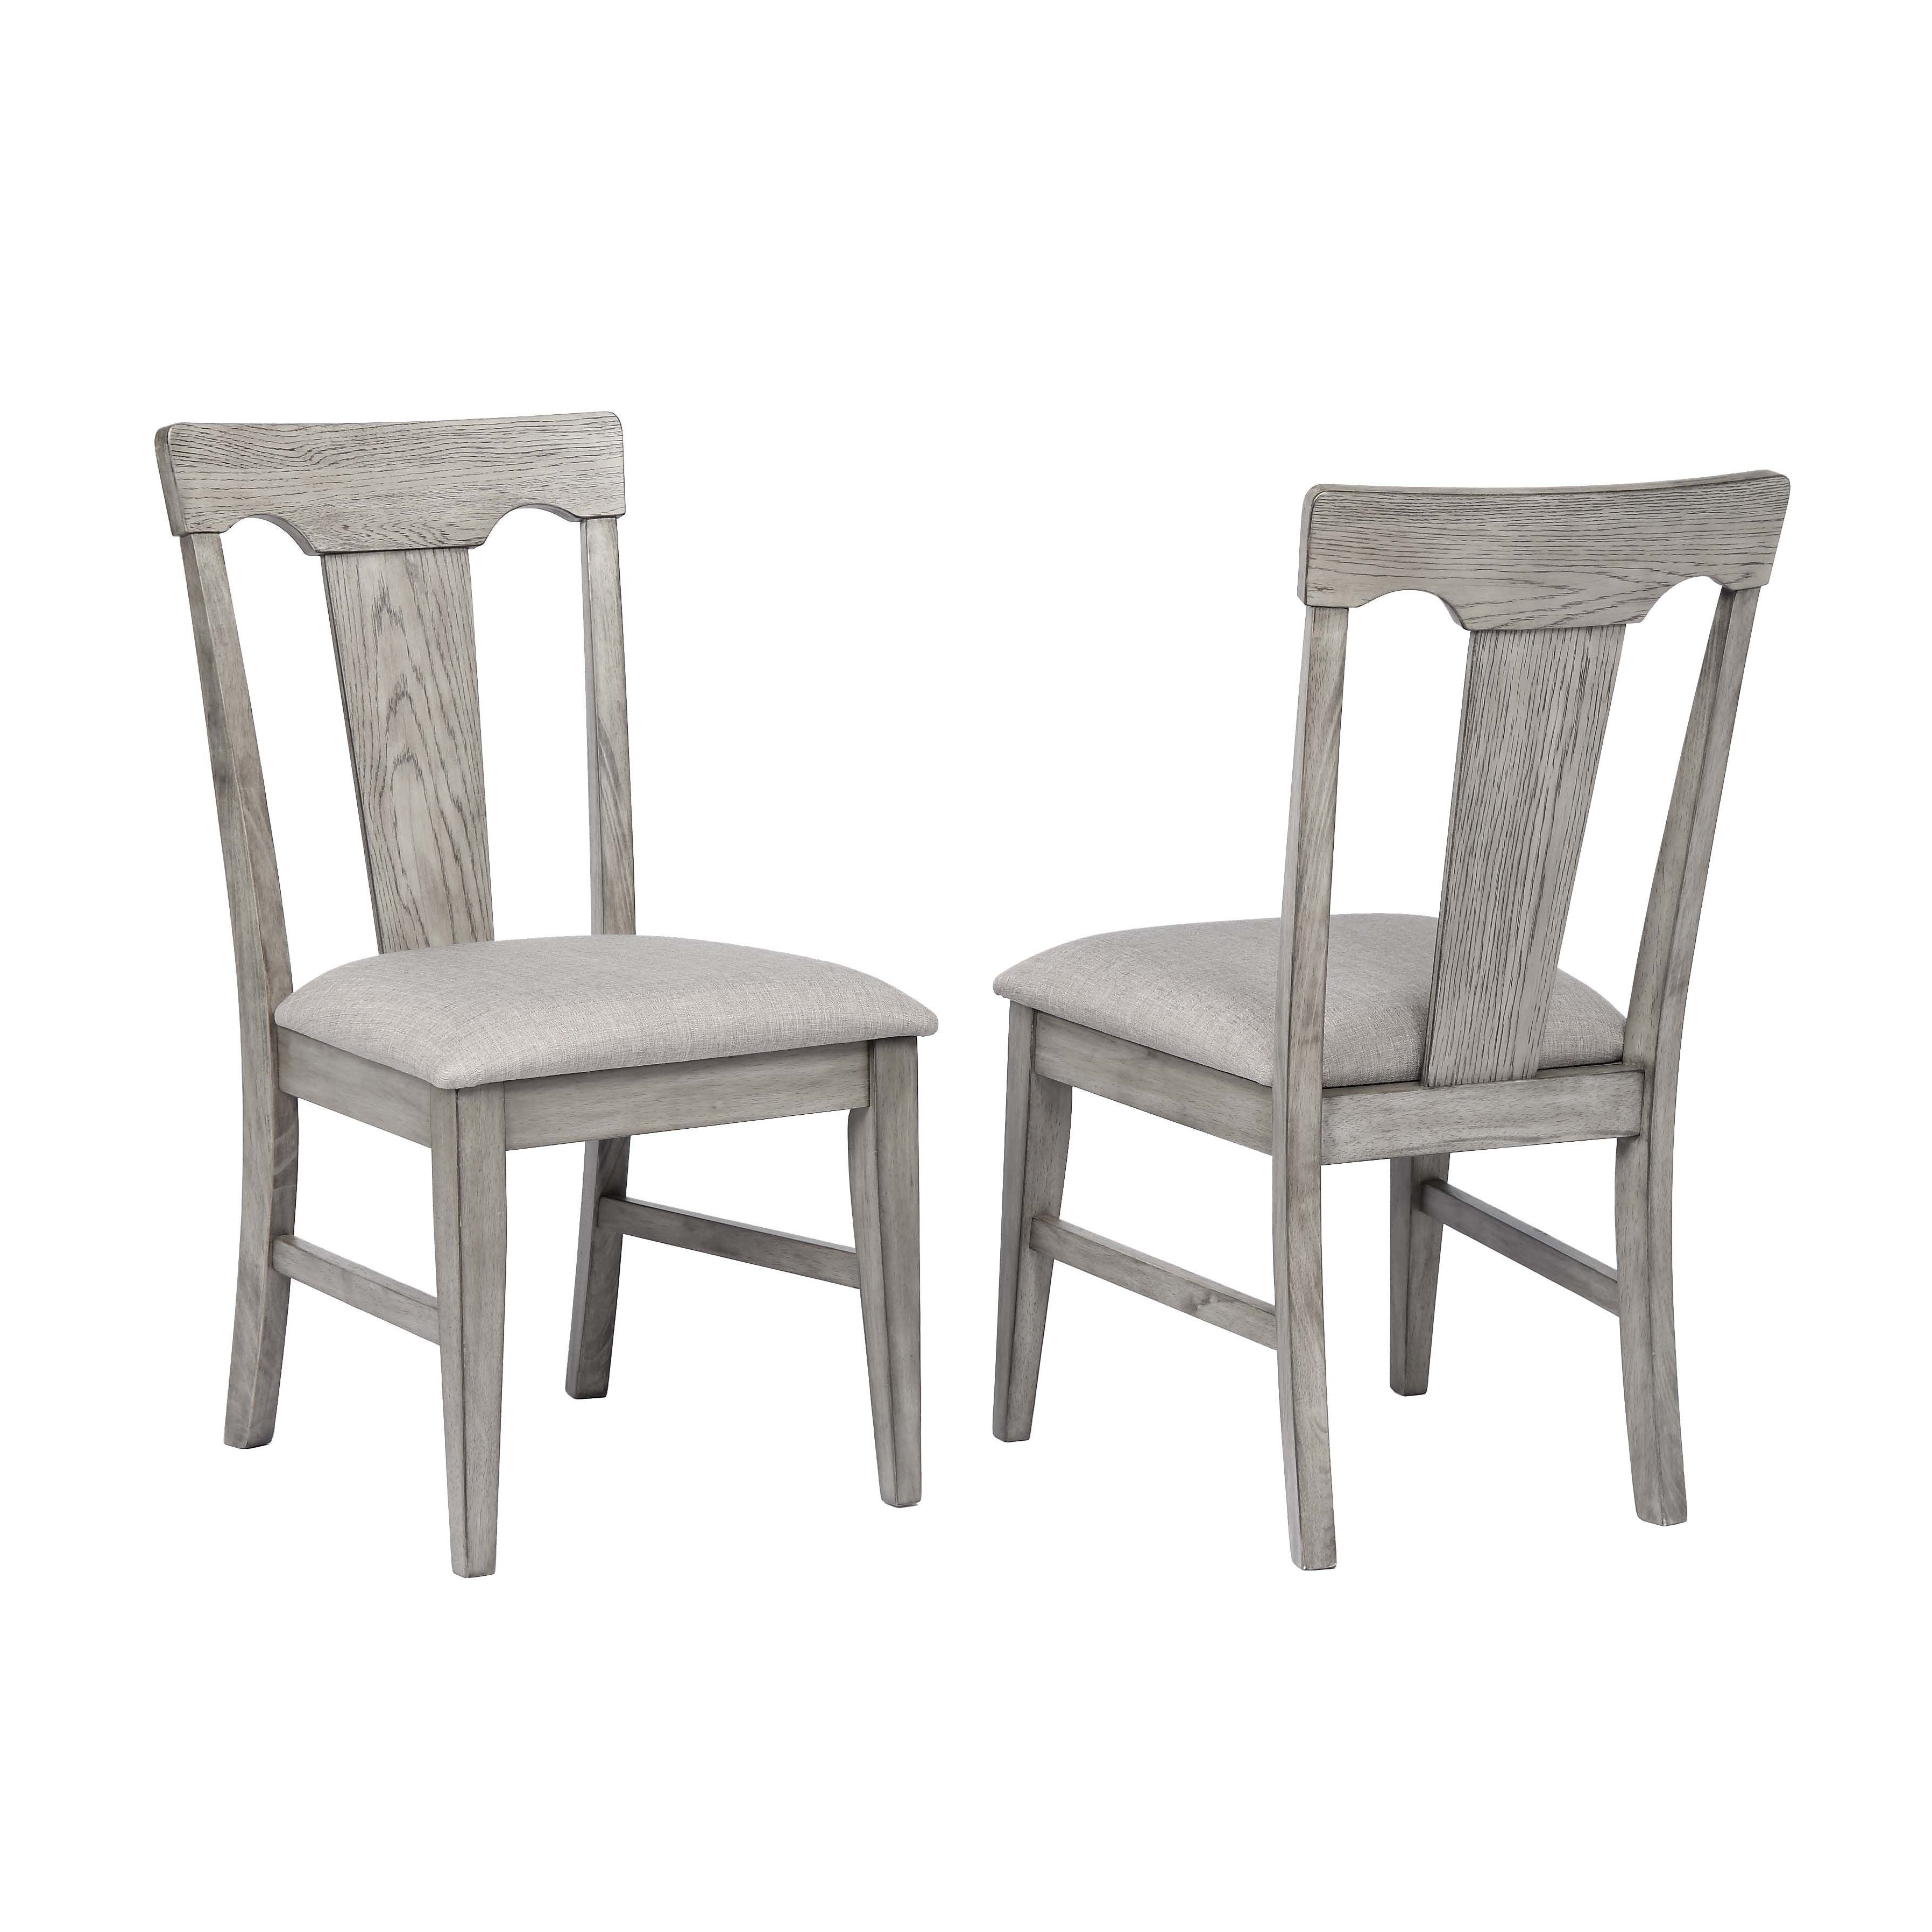 ECI Furniture Graystone Side Chair With Soft Gray Upholstery(2pcs)